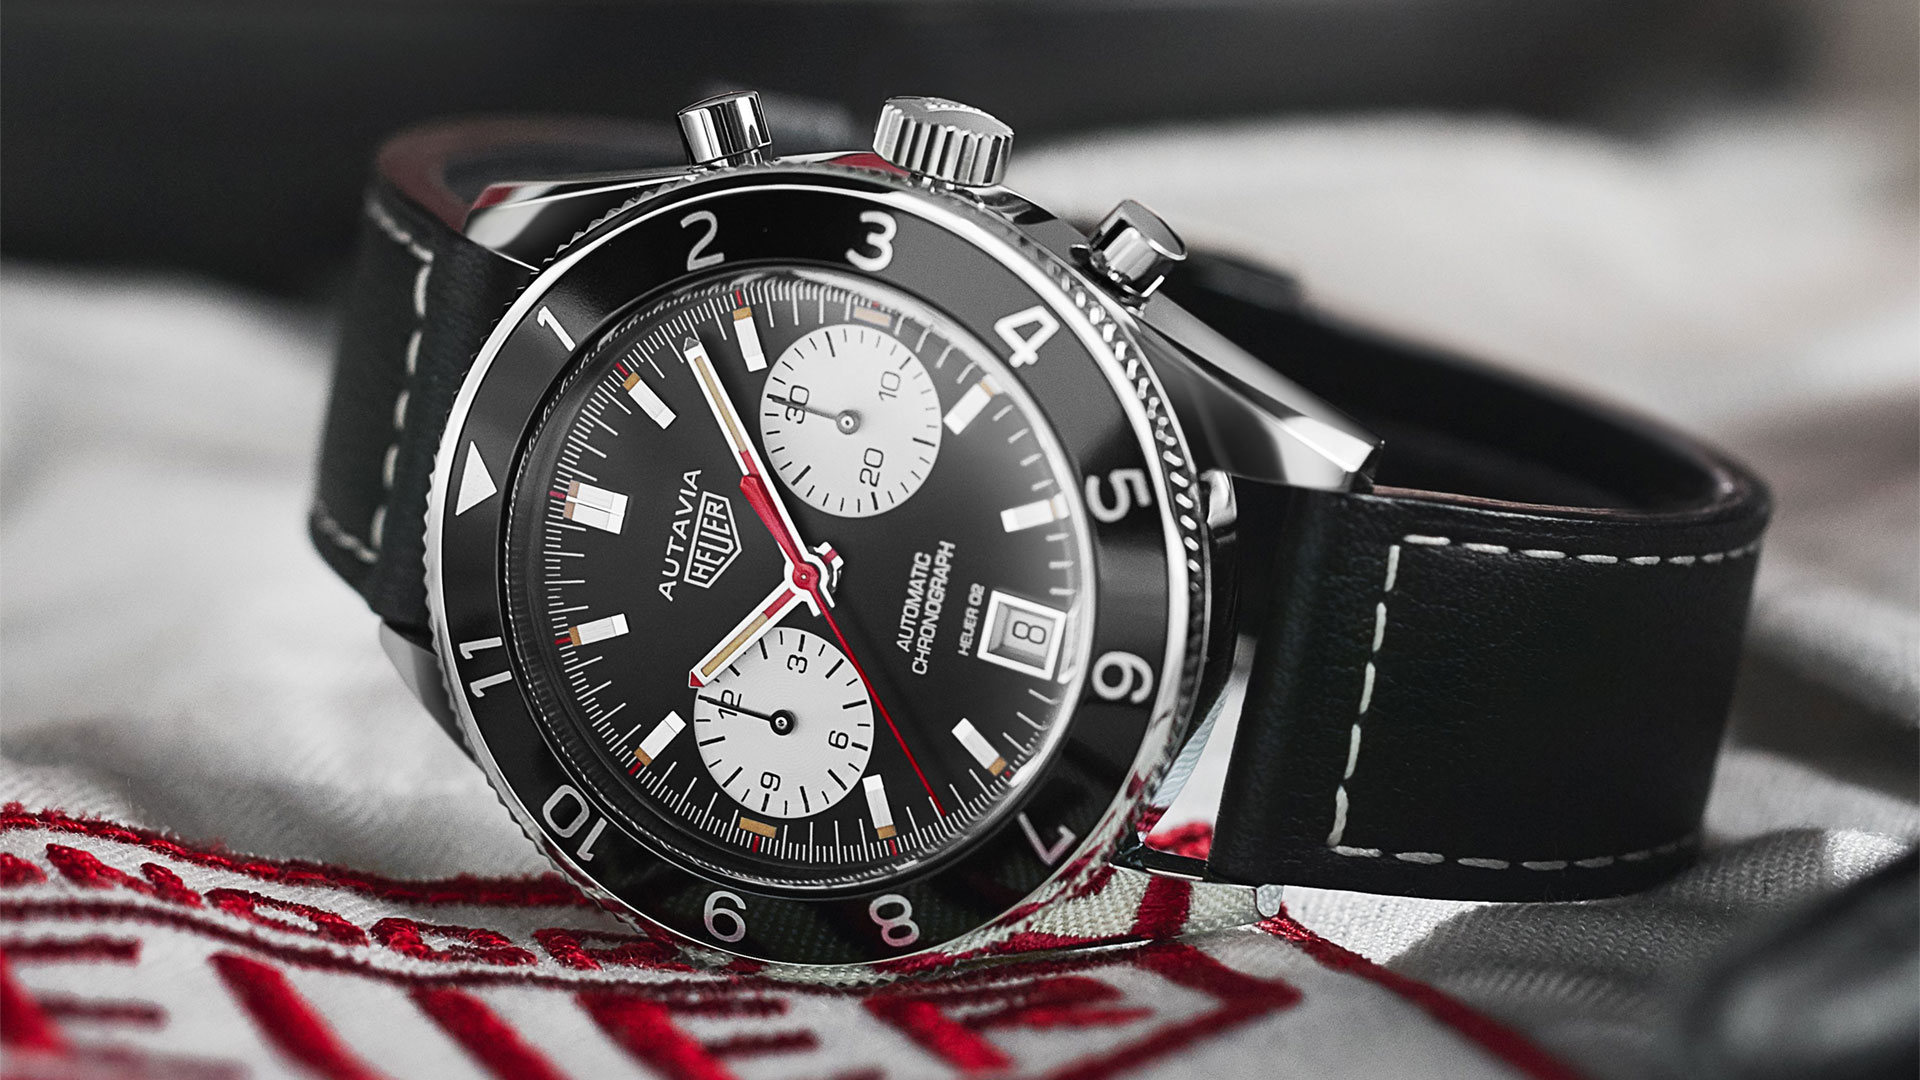 TAG Heuer Heritage Calibre Heuer 02 1972 Autavia Viceroy Re-Edition Watch